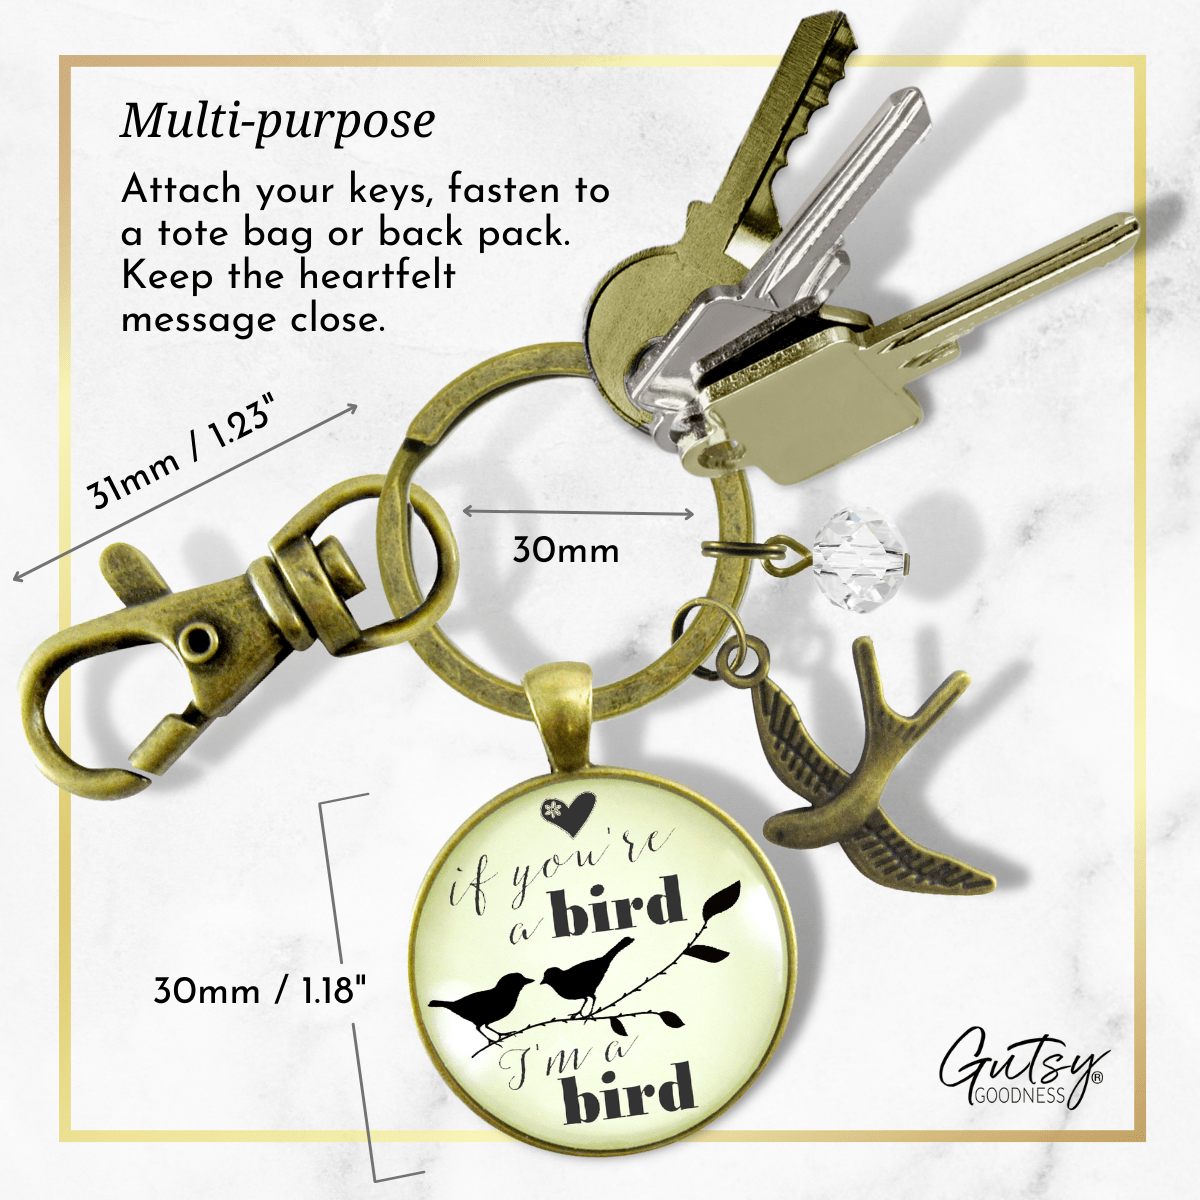 If You're a Bird I'm a Bird Keychain Love Inspired Quote Jewelry Boho Style Womens Gift - Gutsy Goodness